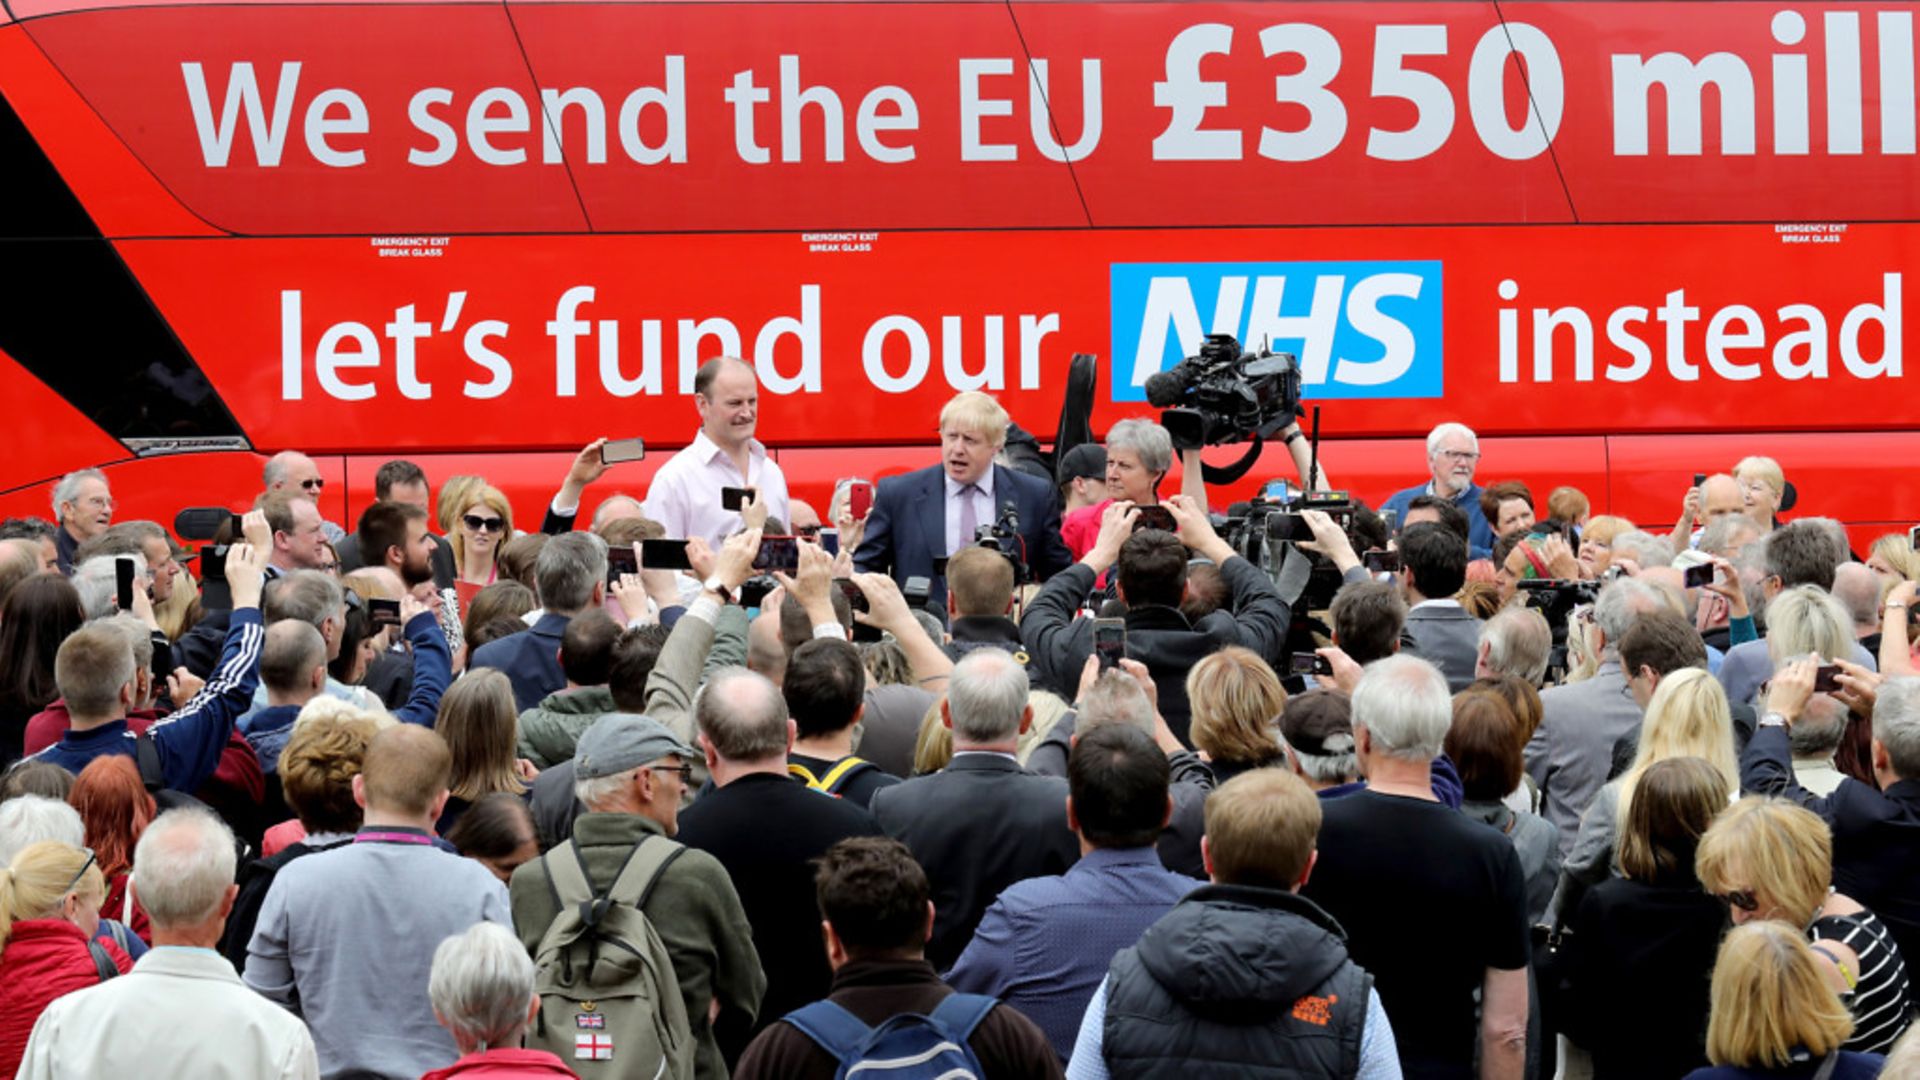 Boris Johnson. Gisela Stuart and Douglas Carswell address the people of Stafford in Market Square during the Vote Leave campaign - Credit: Getty Images